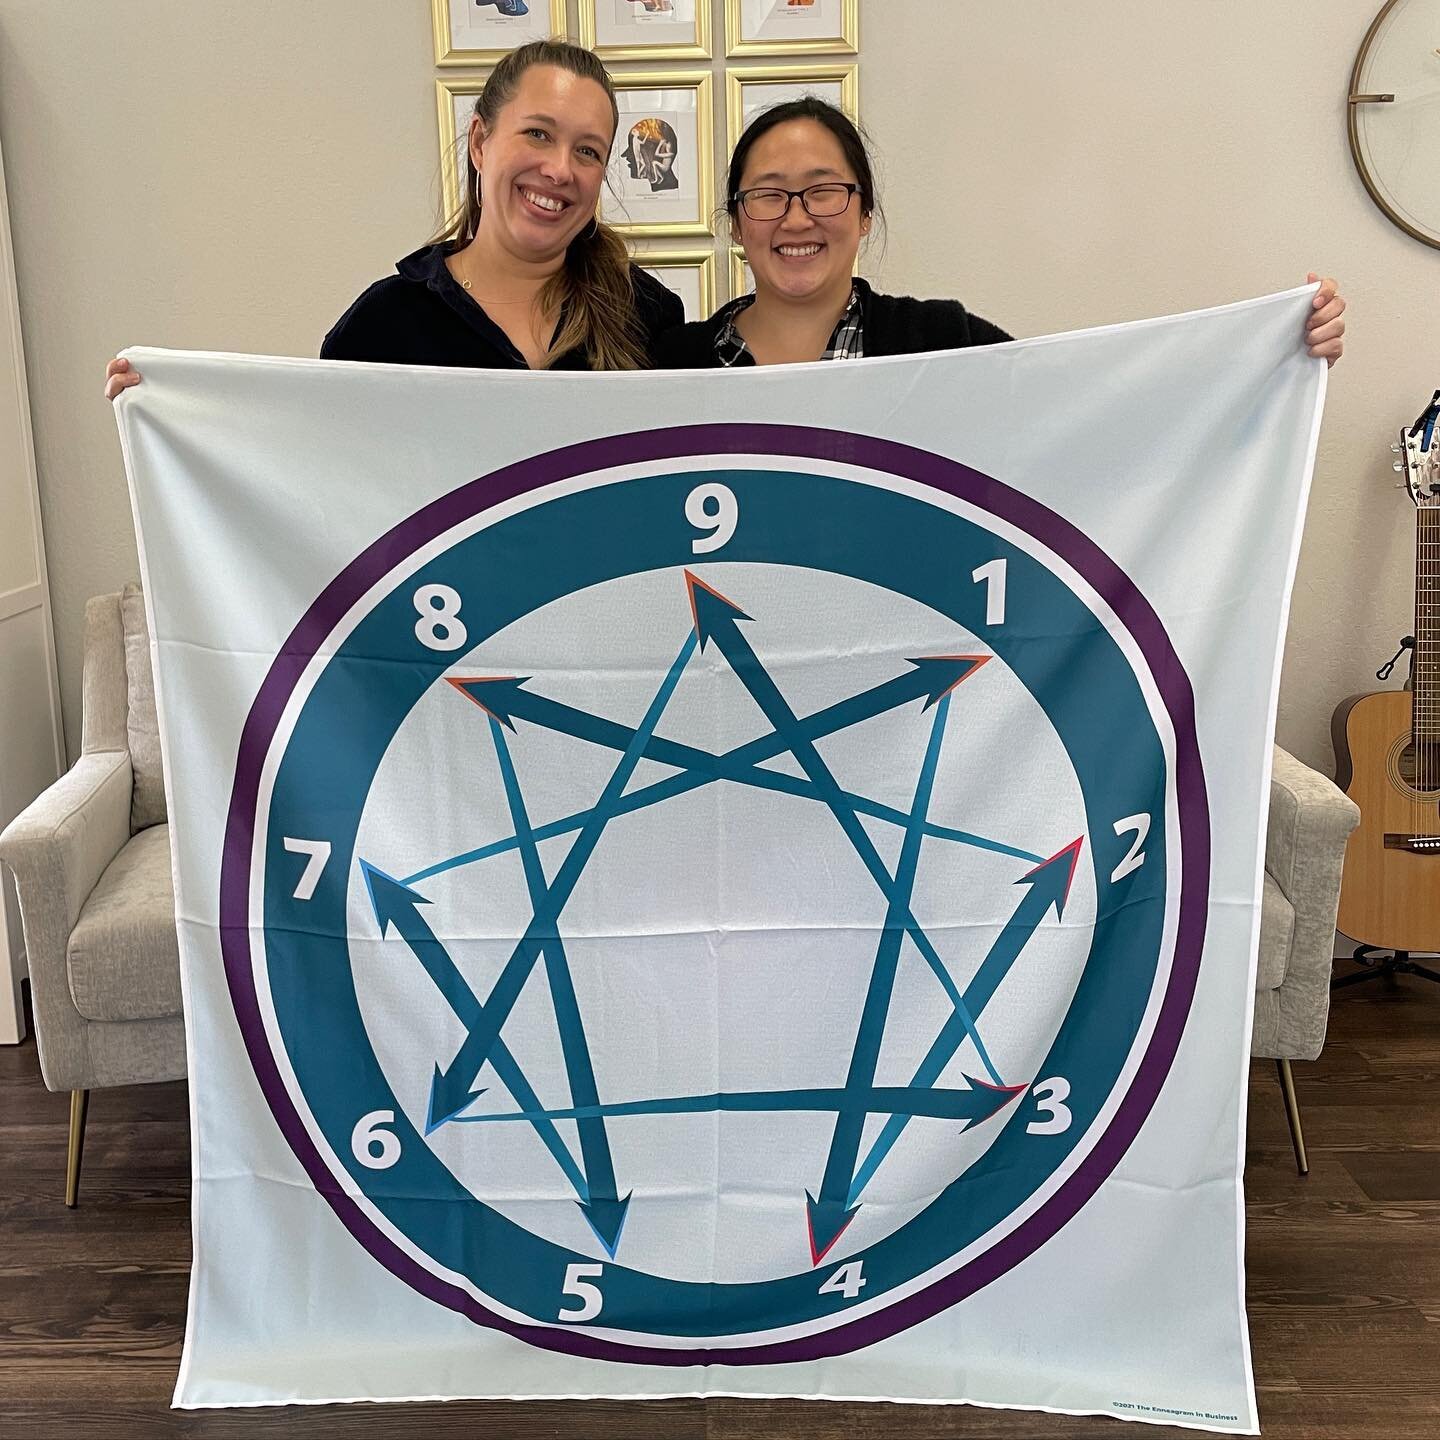 Just got our Enneagram mat!! ❤️ Ready to learn about the types the way you don&rsquo;t usually read about on Insta?

We&rsquo;re not here to say, &ldquo;You are your type&rdquo;; there&rsquo;s so much more to you than you think there is!

We&rsquo;re